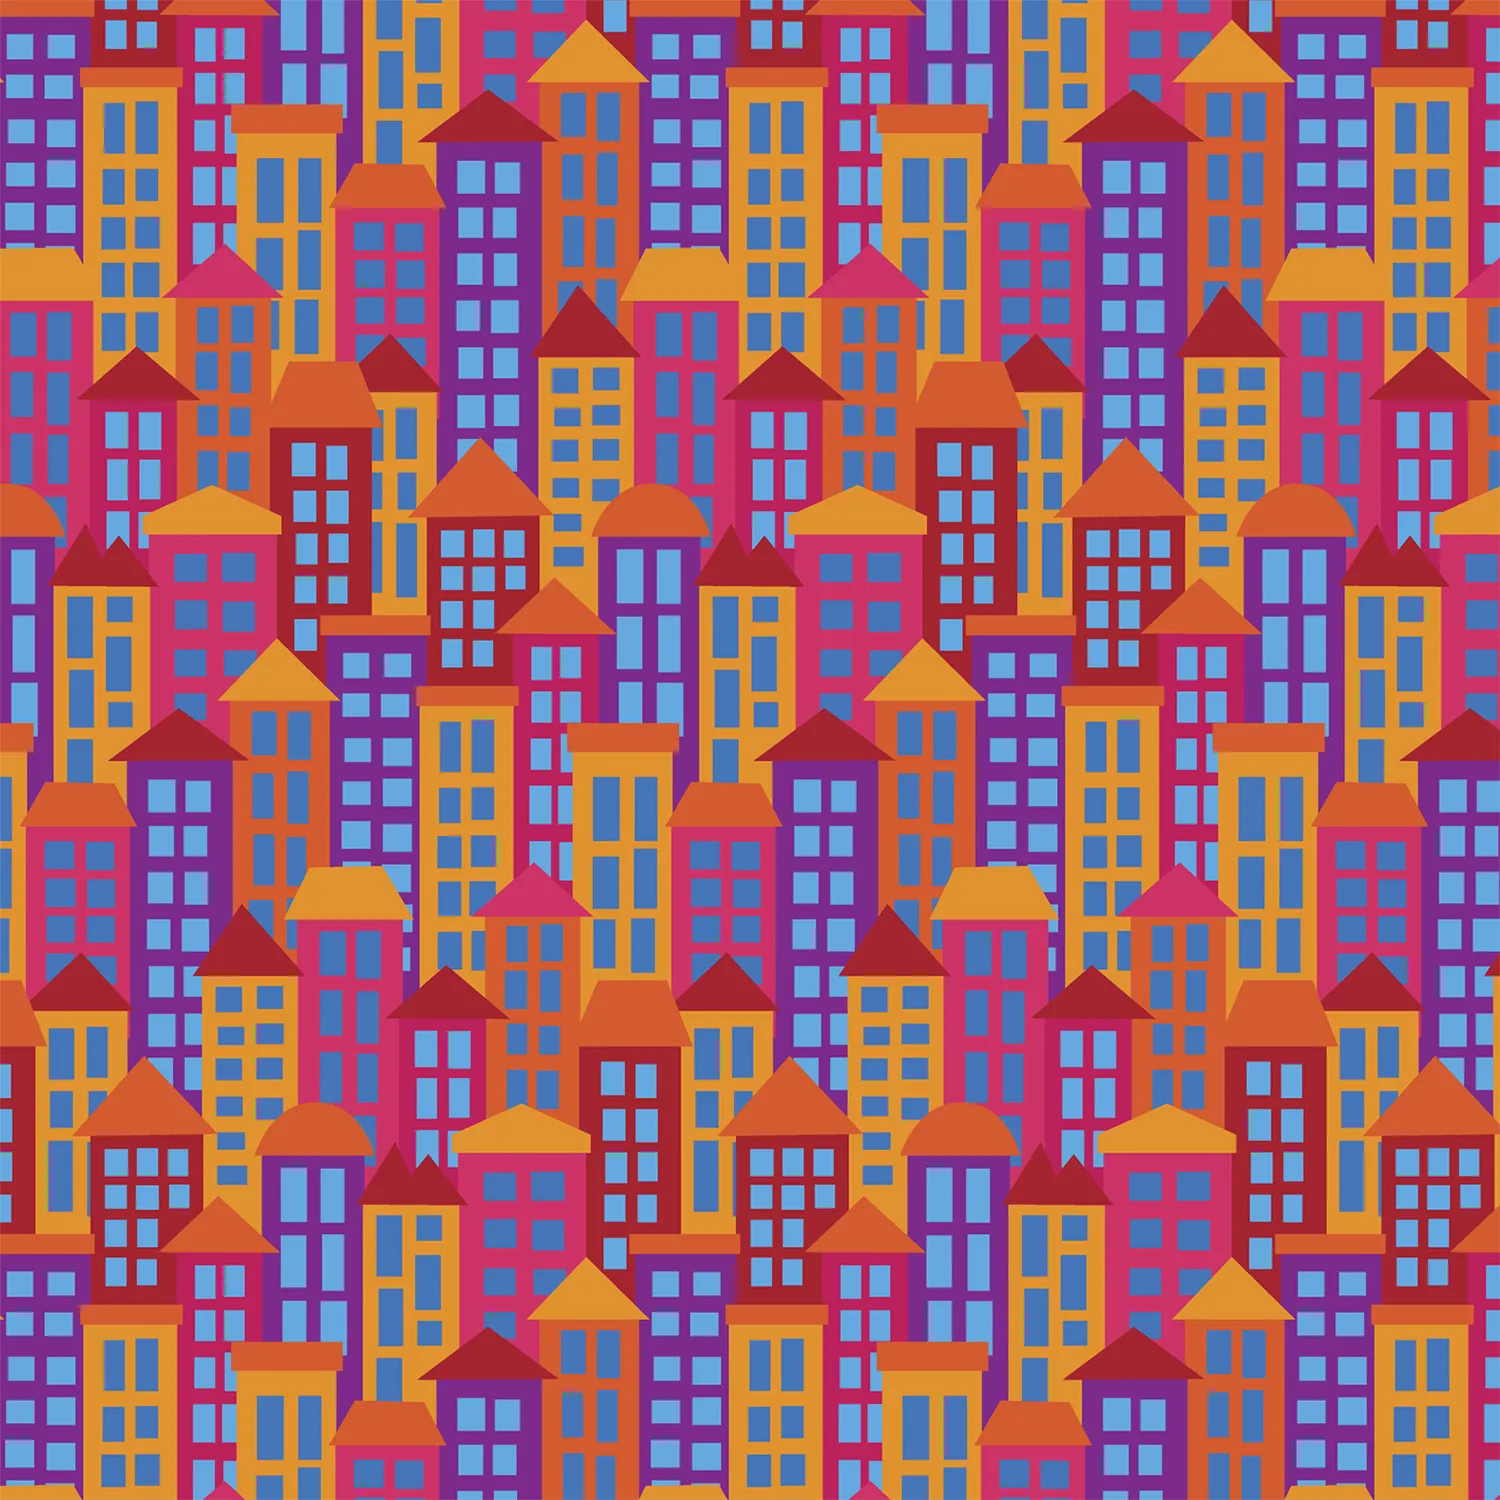 3 Homes Pattern Design expanded